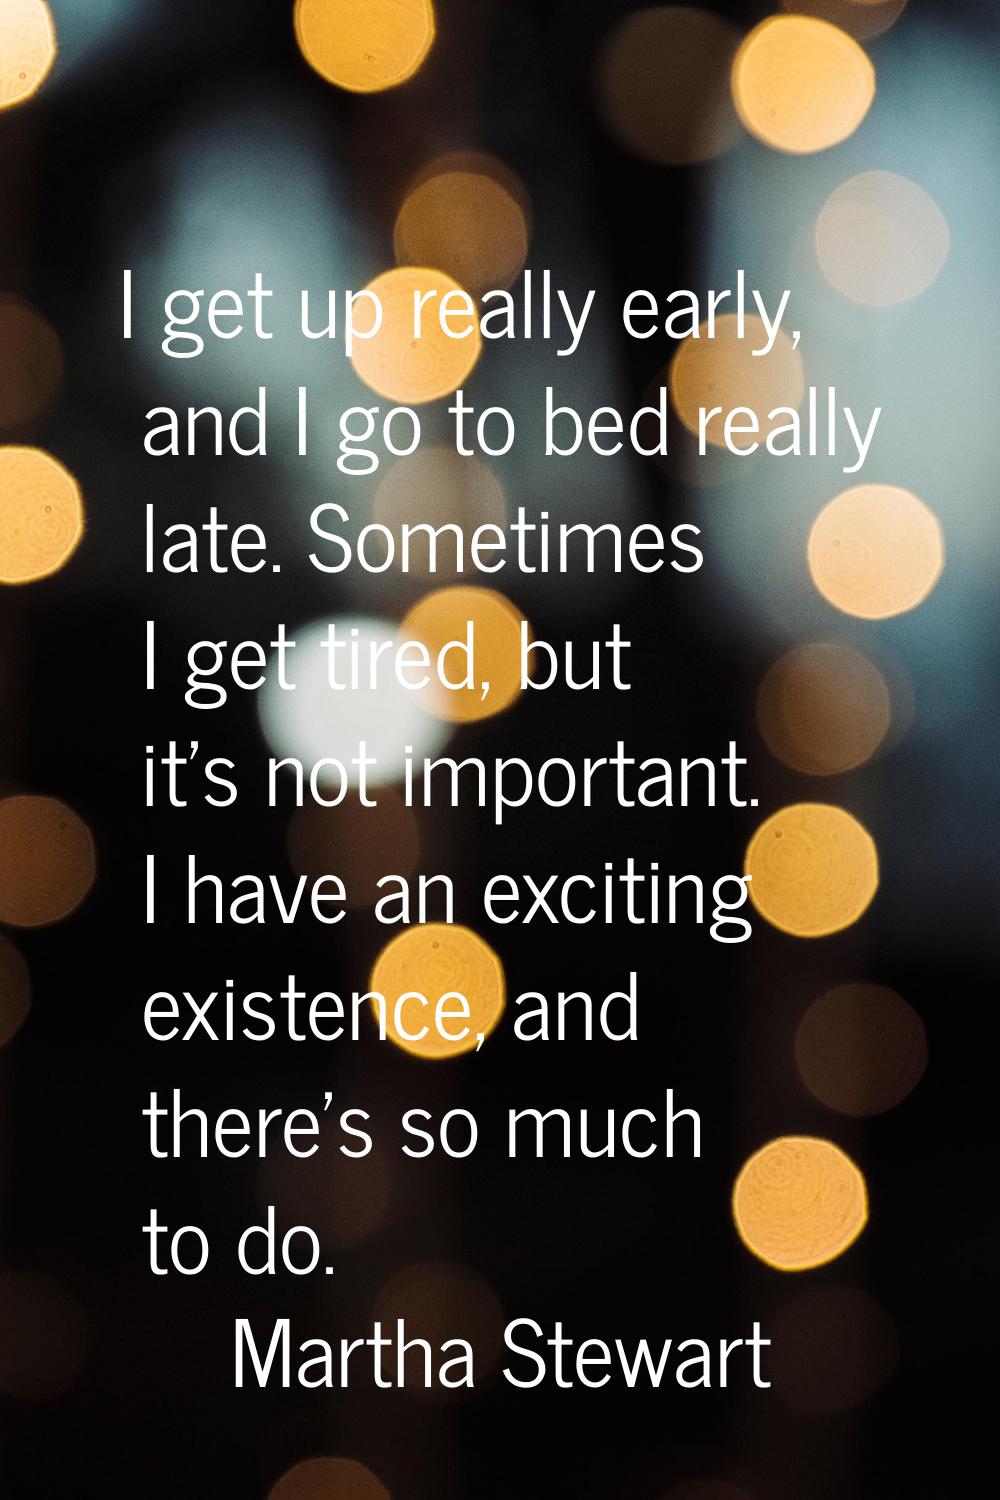 I get up really early, and I go to bed really late. Sometimes I get tired, but it's not important. 